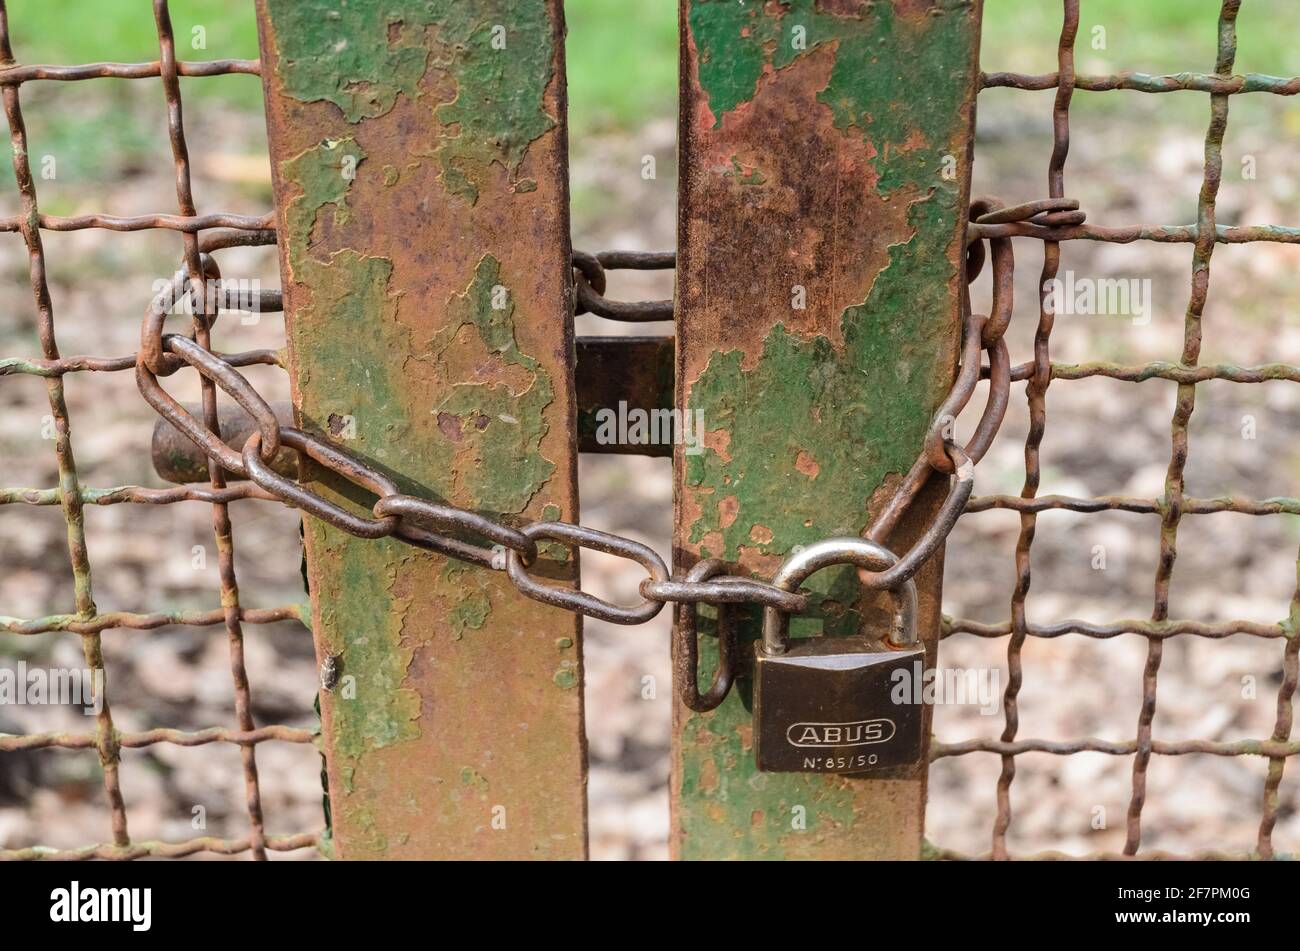 Closed rusty iron metal gate with chain, ABUS padlock and chain-link fence Stock Photo